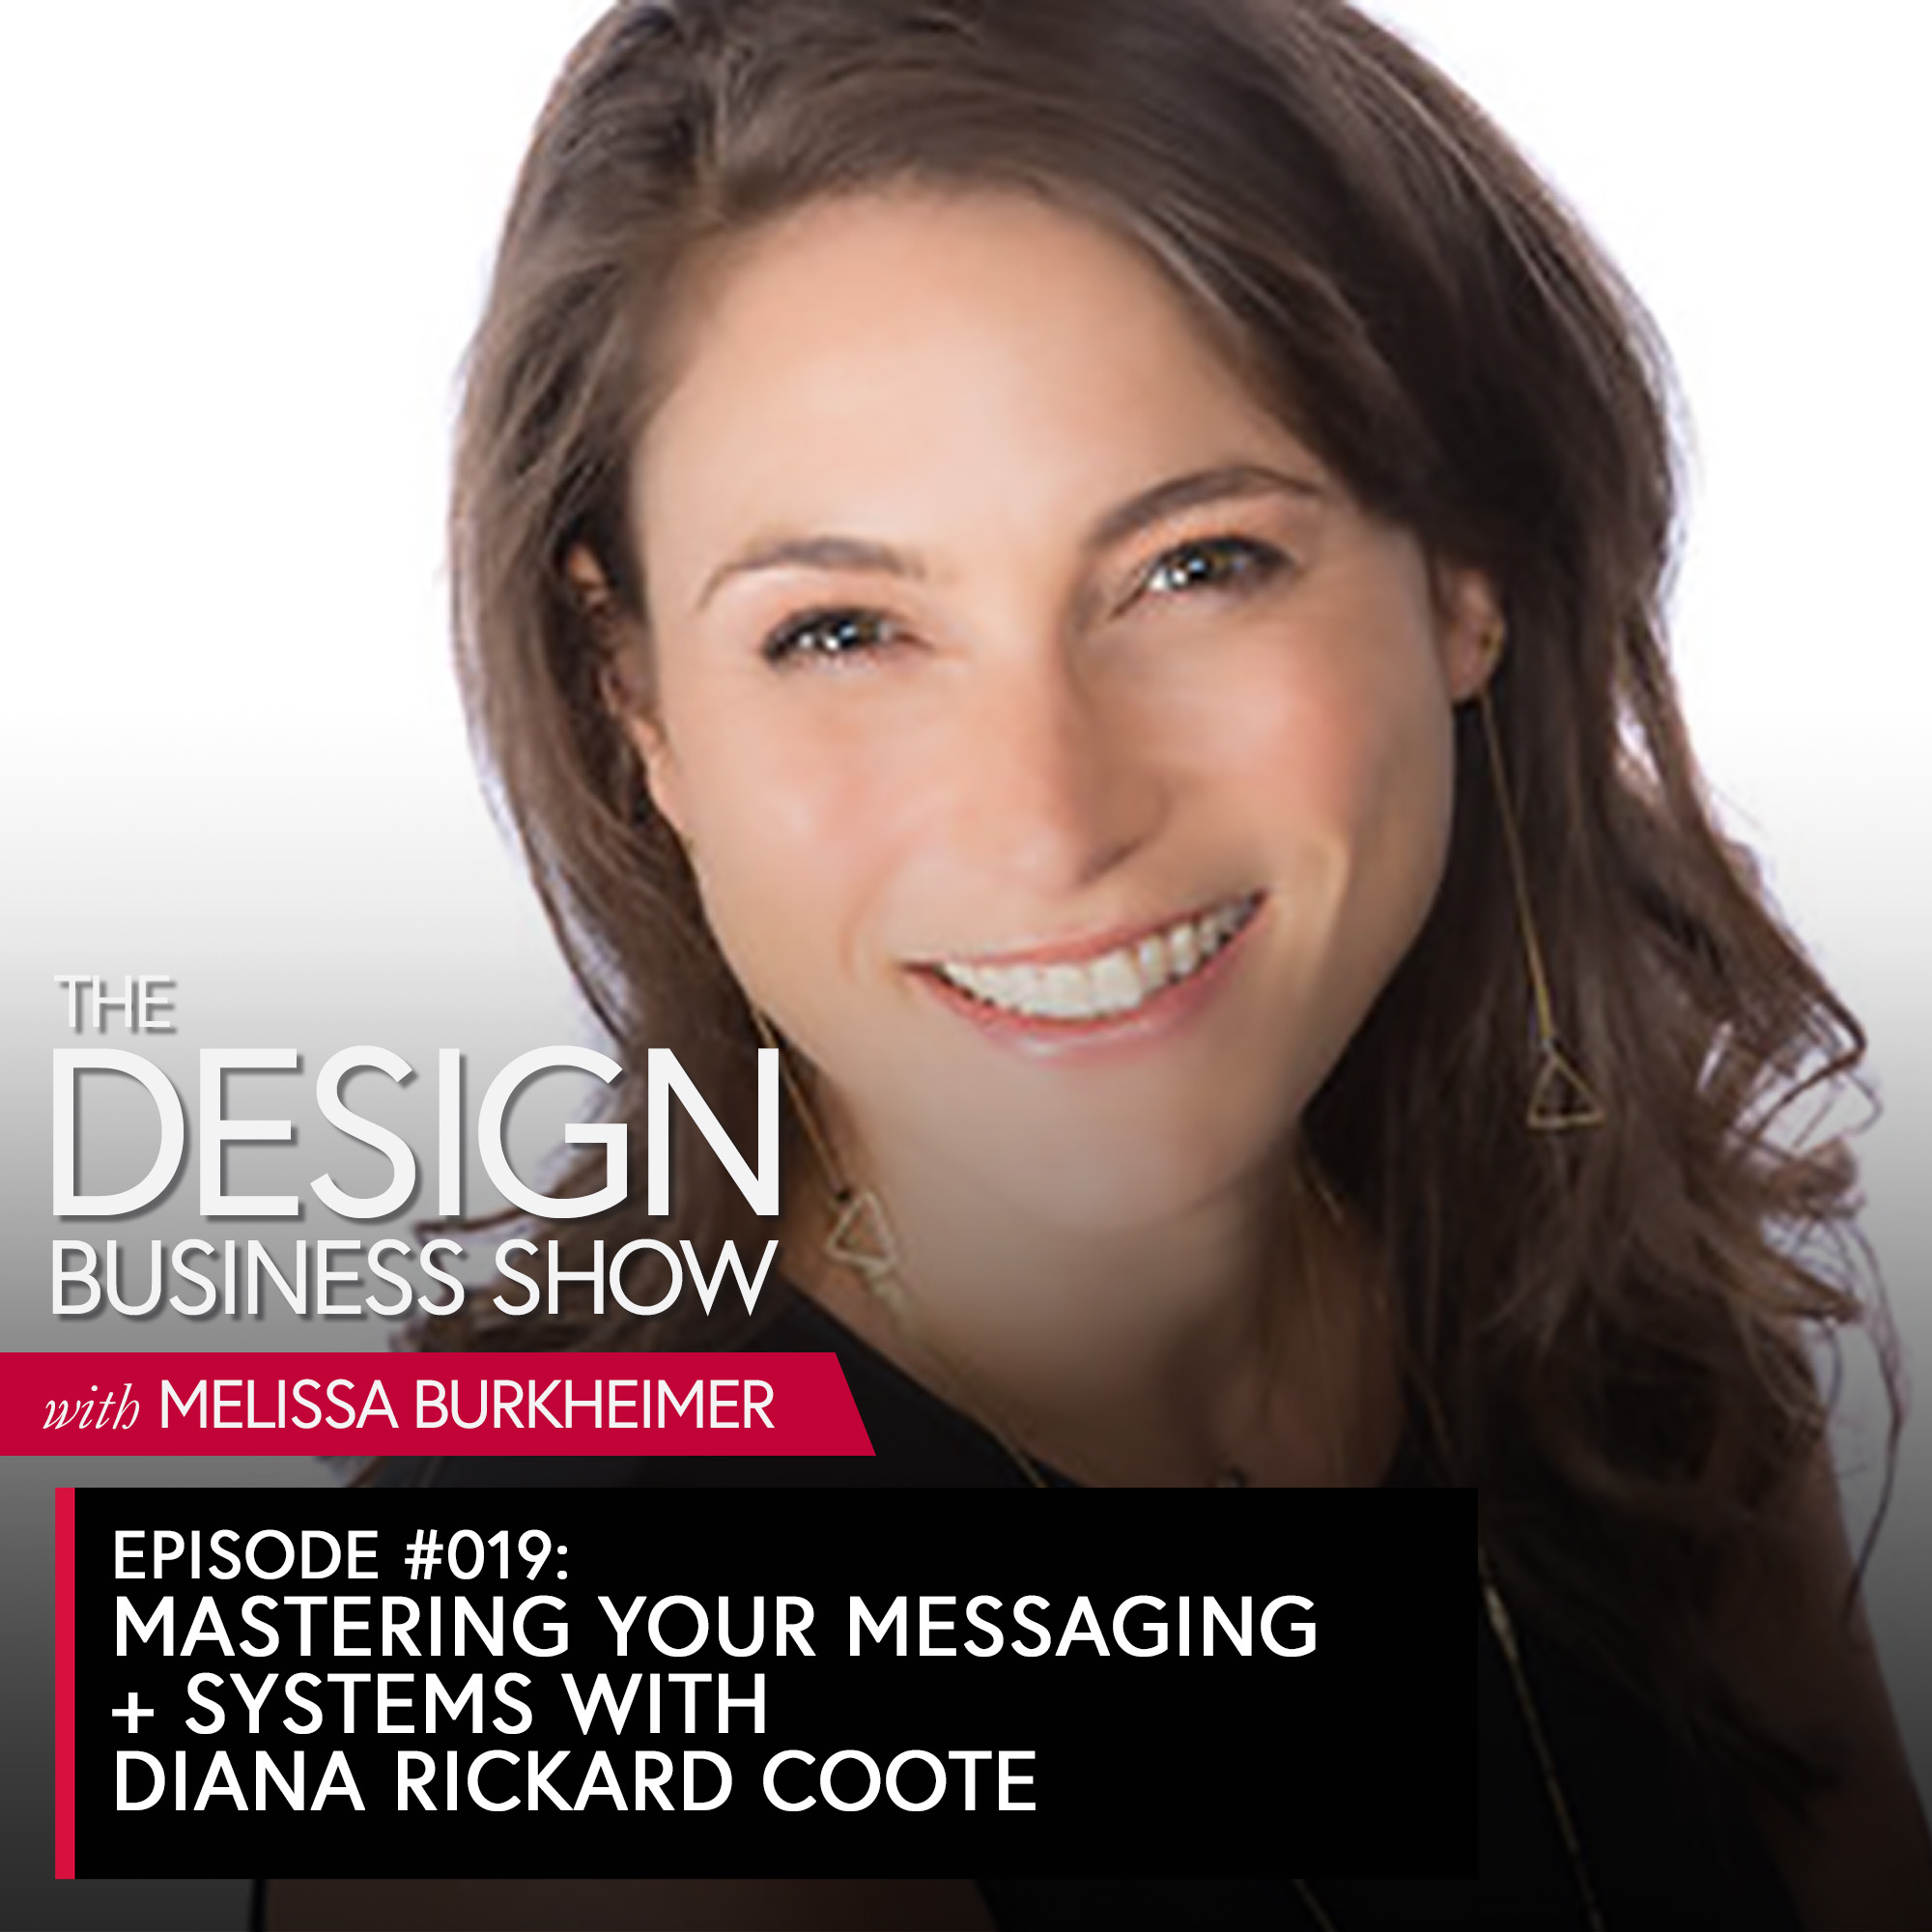 Listen to episode 19 of The Design Business Show with one of my favorite students, Diana Rickard Coote, about the growth of her design business.